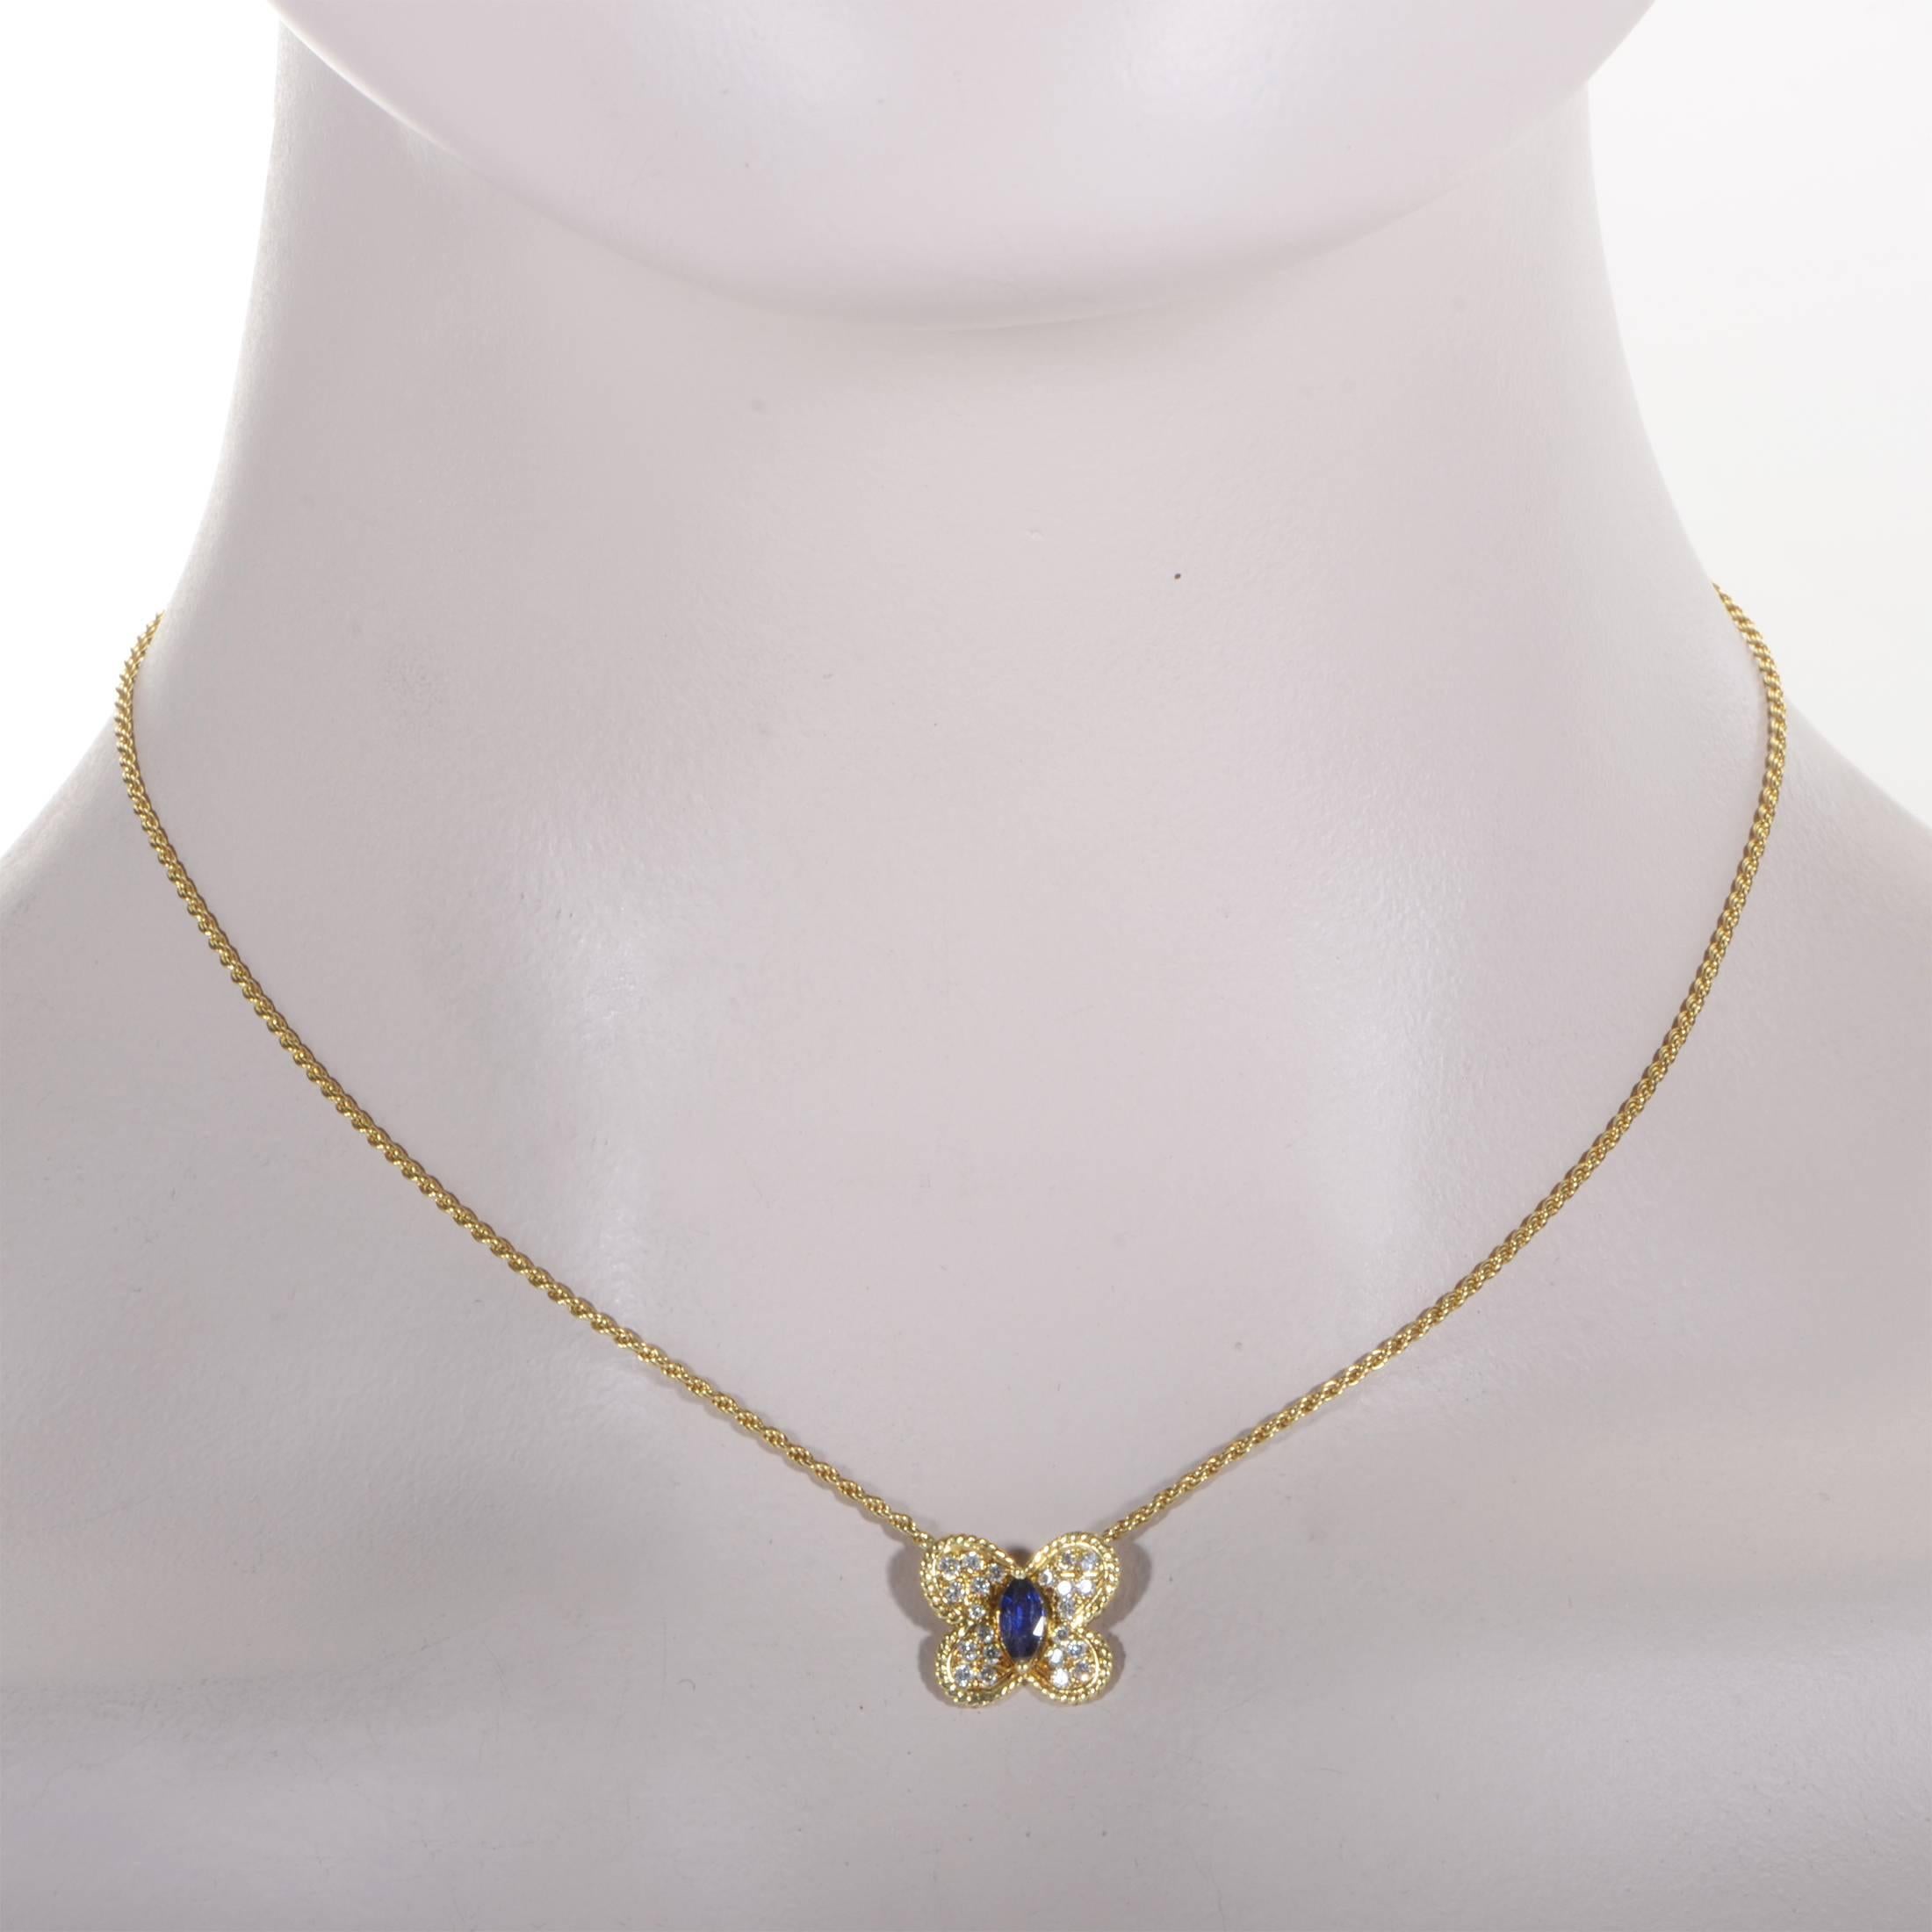 The ever-charming motif of a gorgeous butterfly is presented in this exuberant necklace from Graff in radiant 18K yellow gold adorned with glittering diamonds amounting to 0.40ct, while a stunning sapphire weighing 0.30ct is placed at the center of